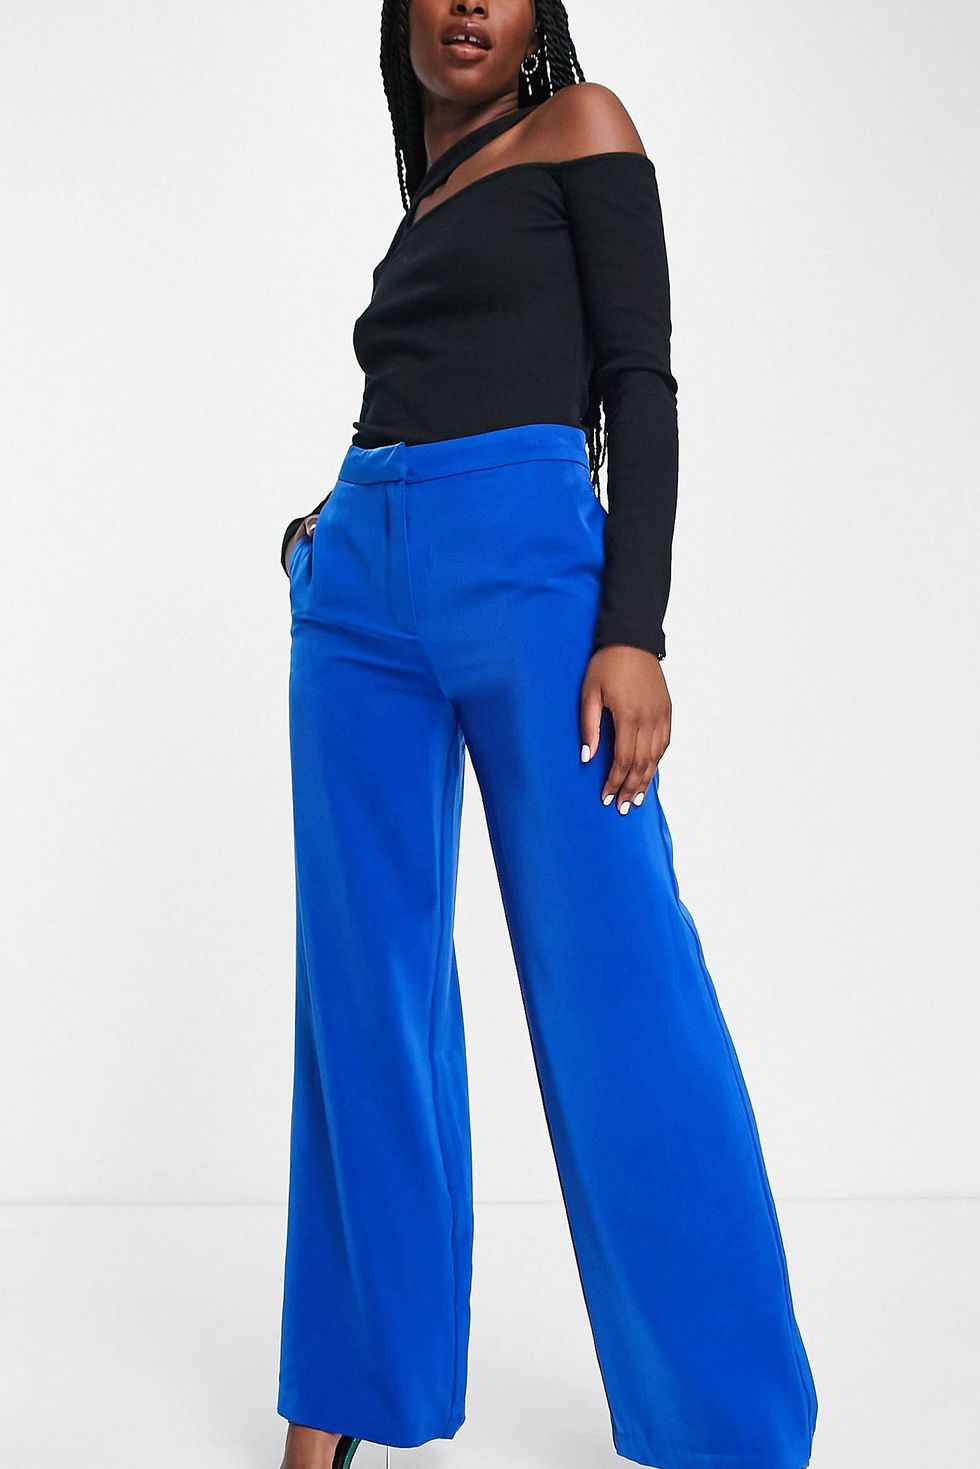 10 Best Tailored Pants For Women